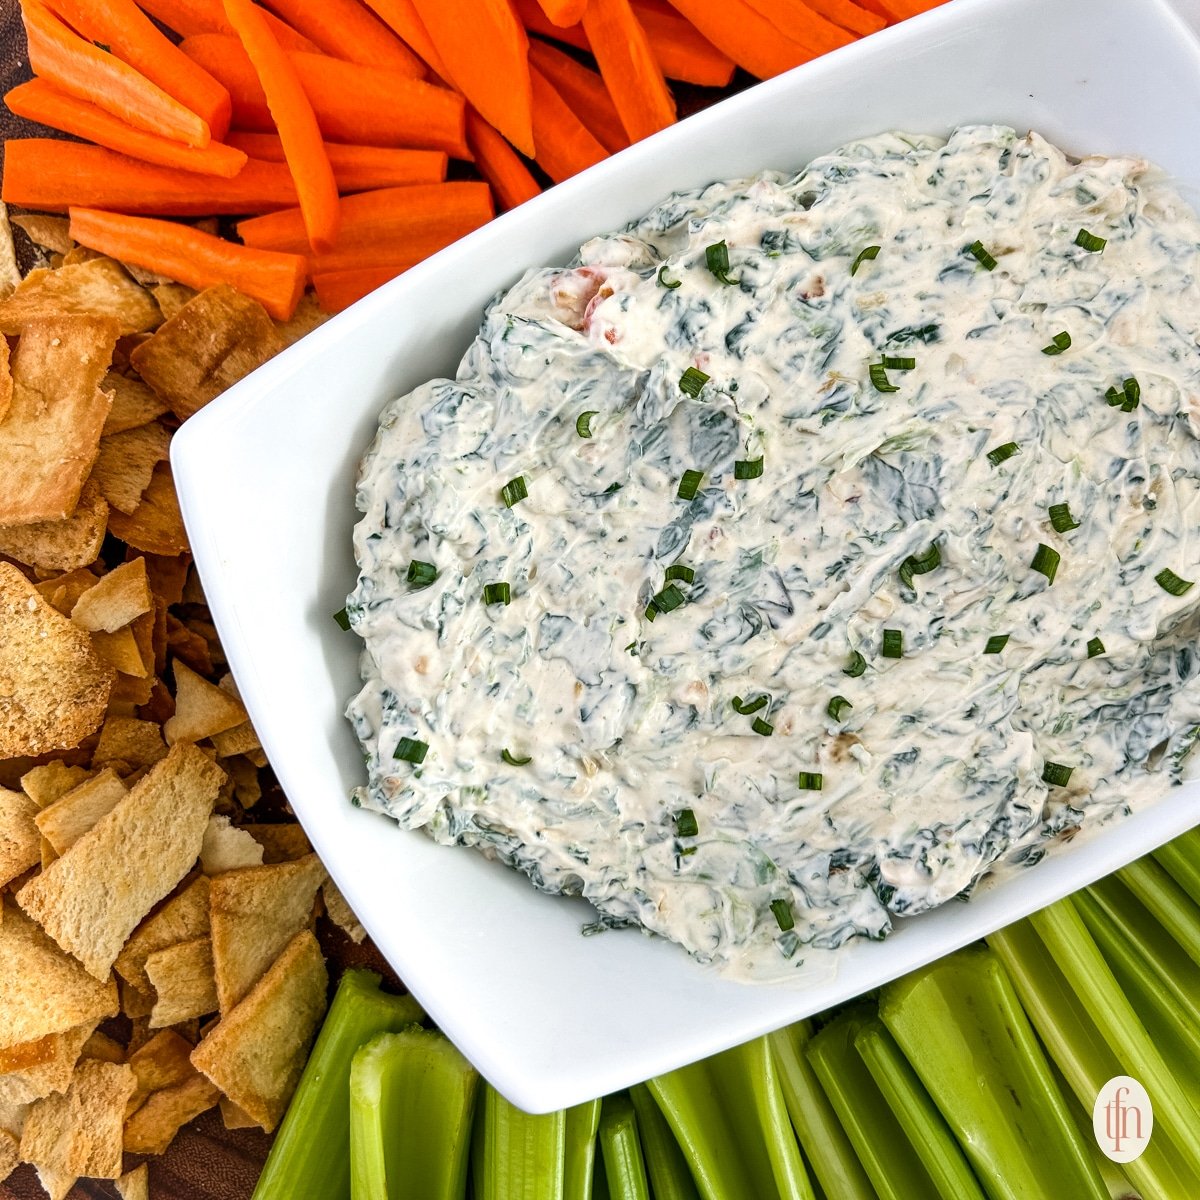 Knorr spinach dip on a serving rectangular bowl. Served on top of a round wooden board with crackers and vegetables.